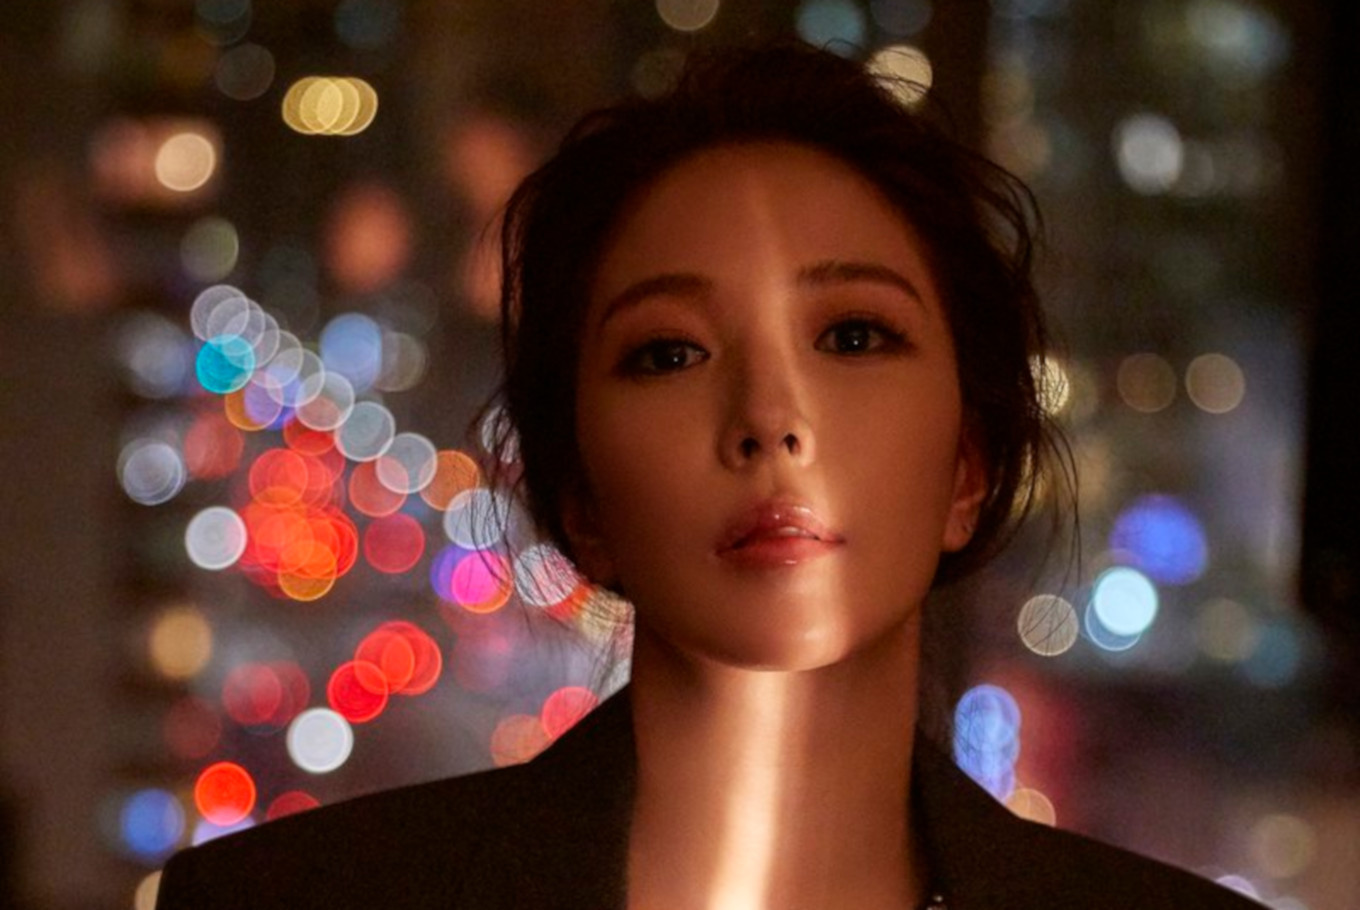 KPop singer BoA to mark 20th anniversary with virtual event